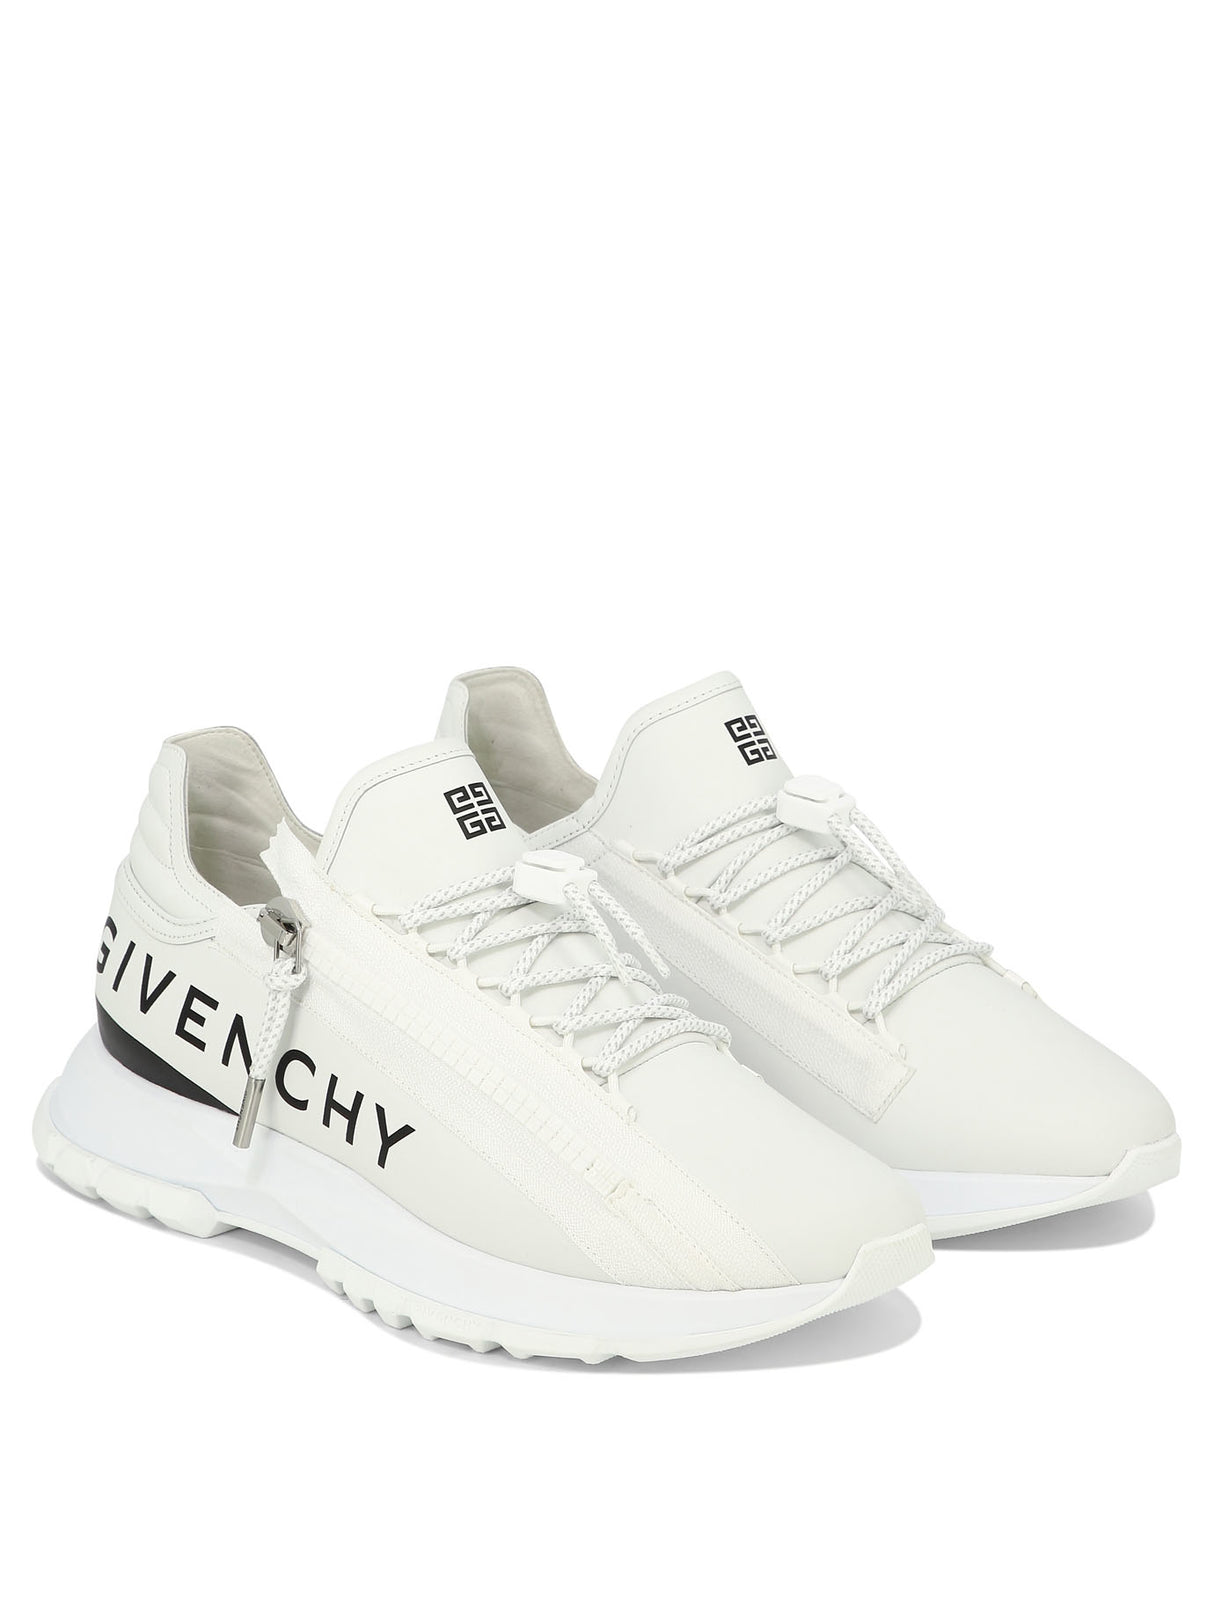 GIVENCHY "SPECTRE" Sneaker